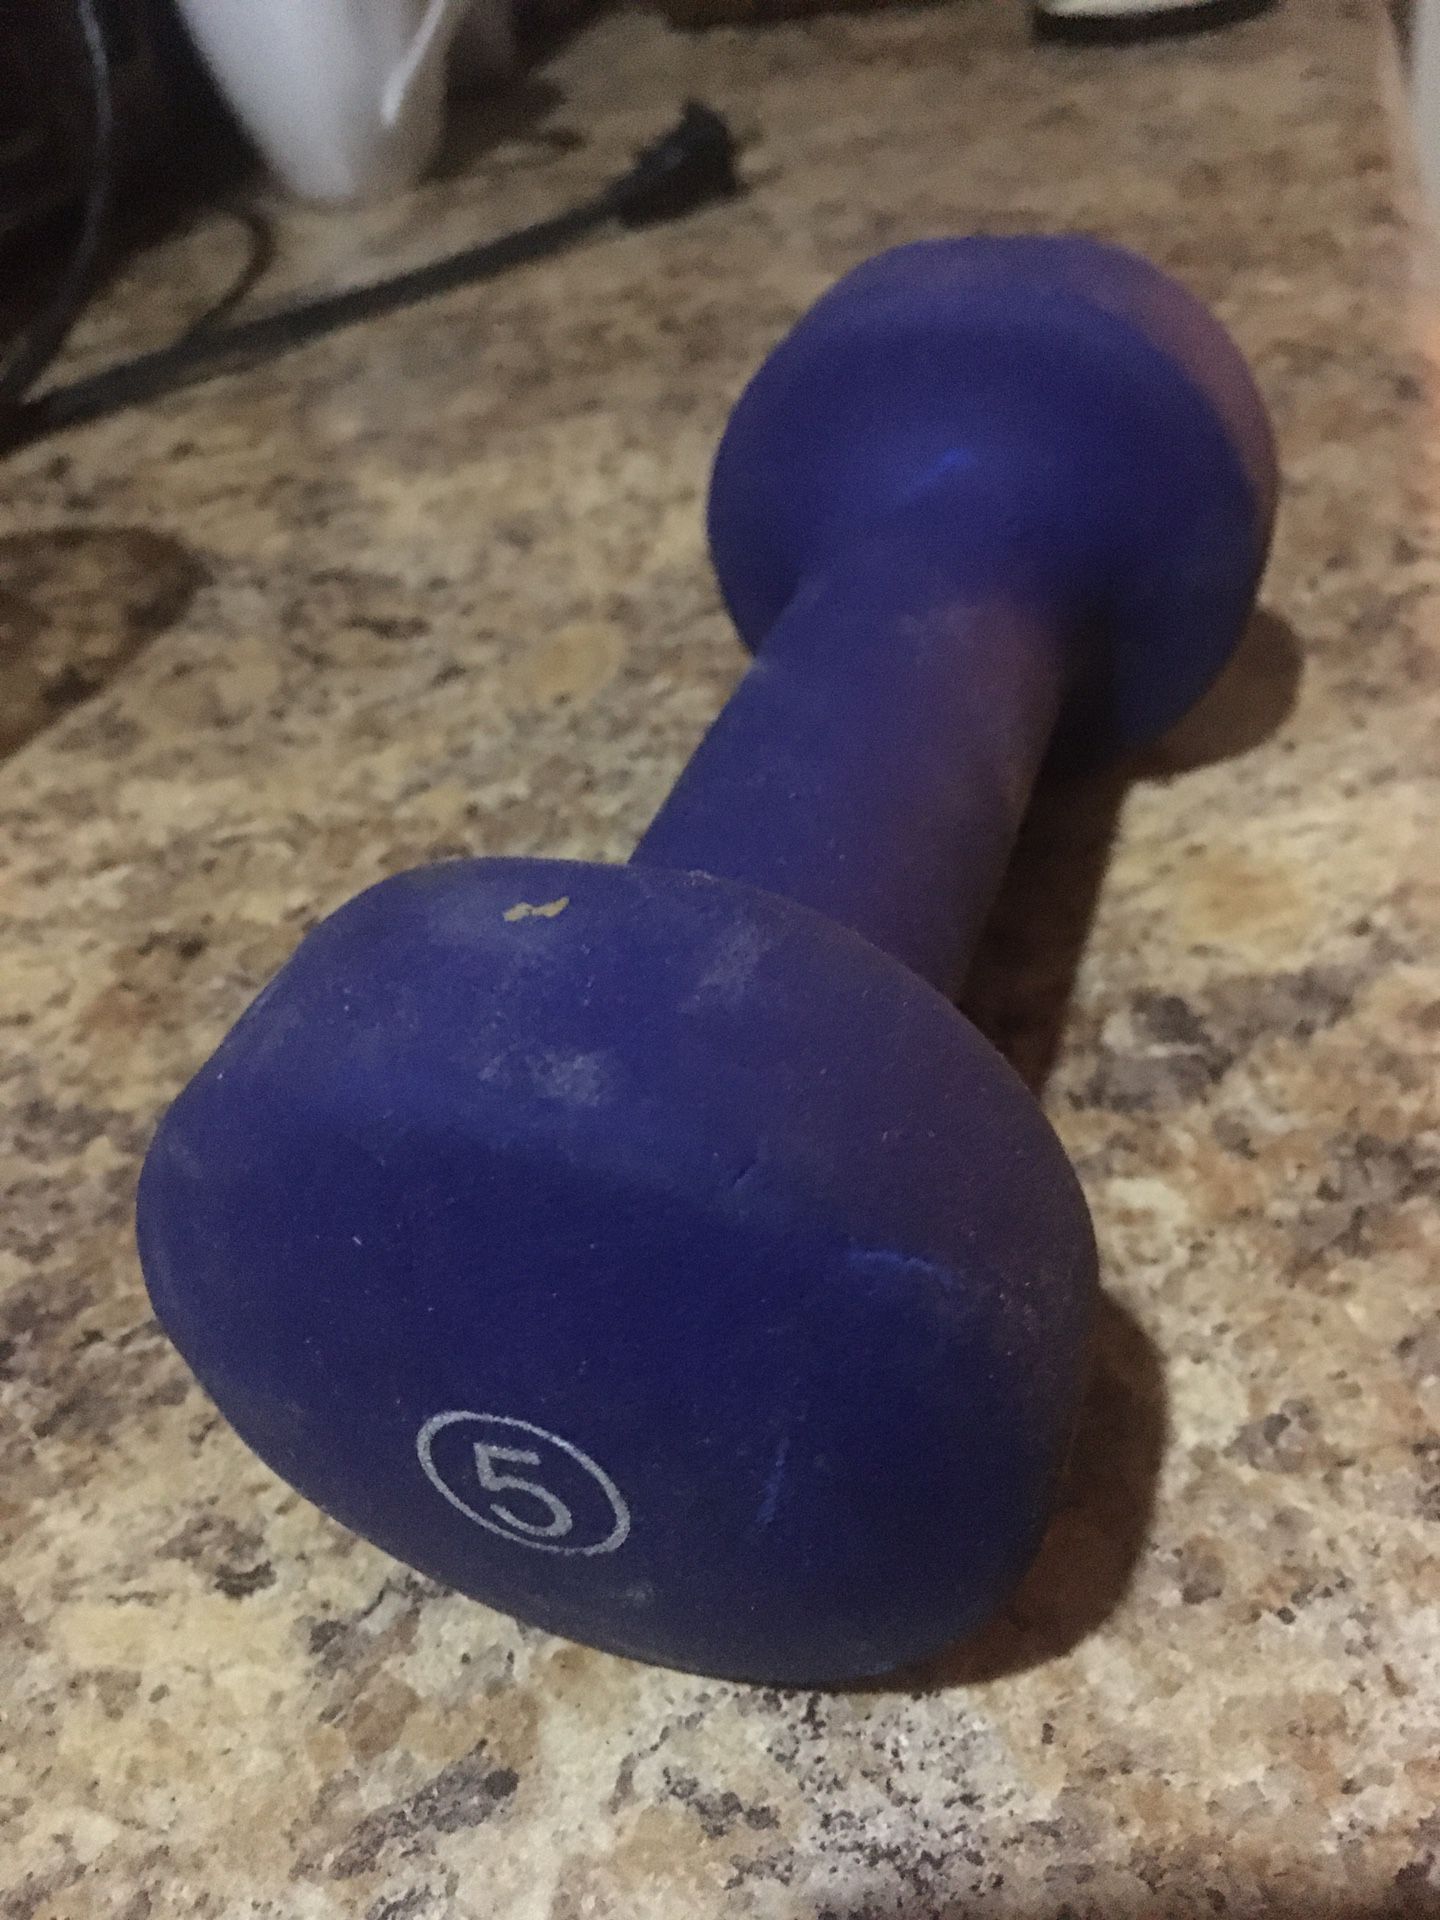 5 pound hand Weight dumbbell Rubber coated for safety